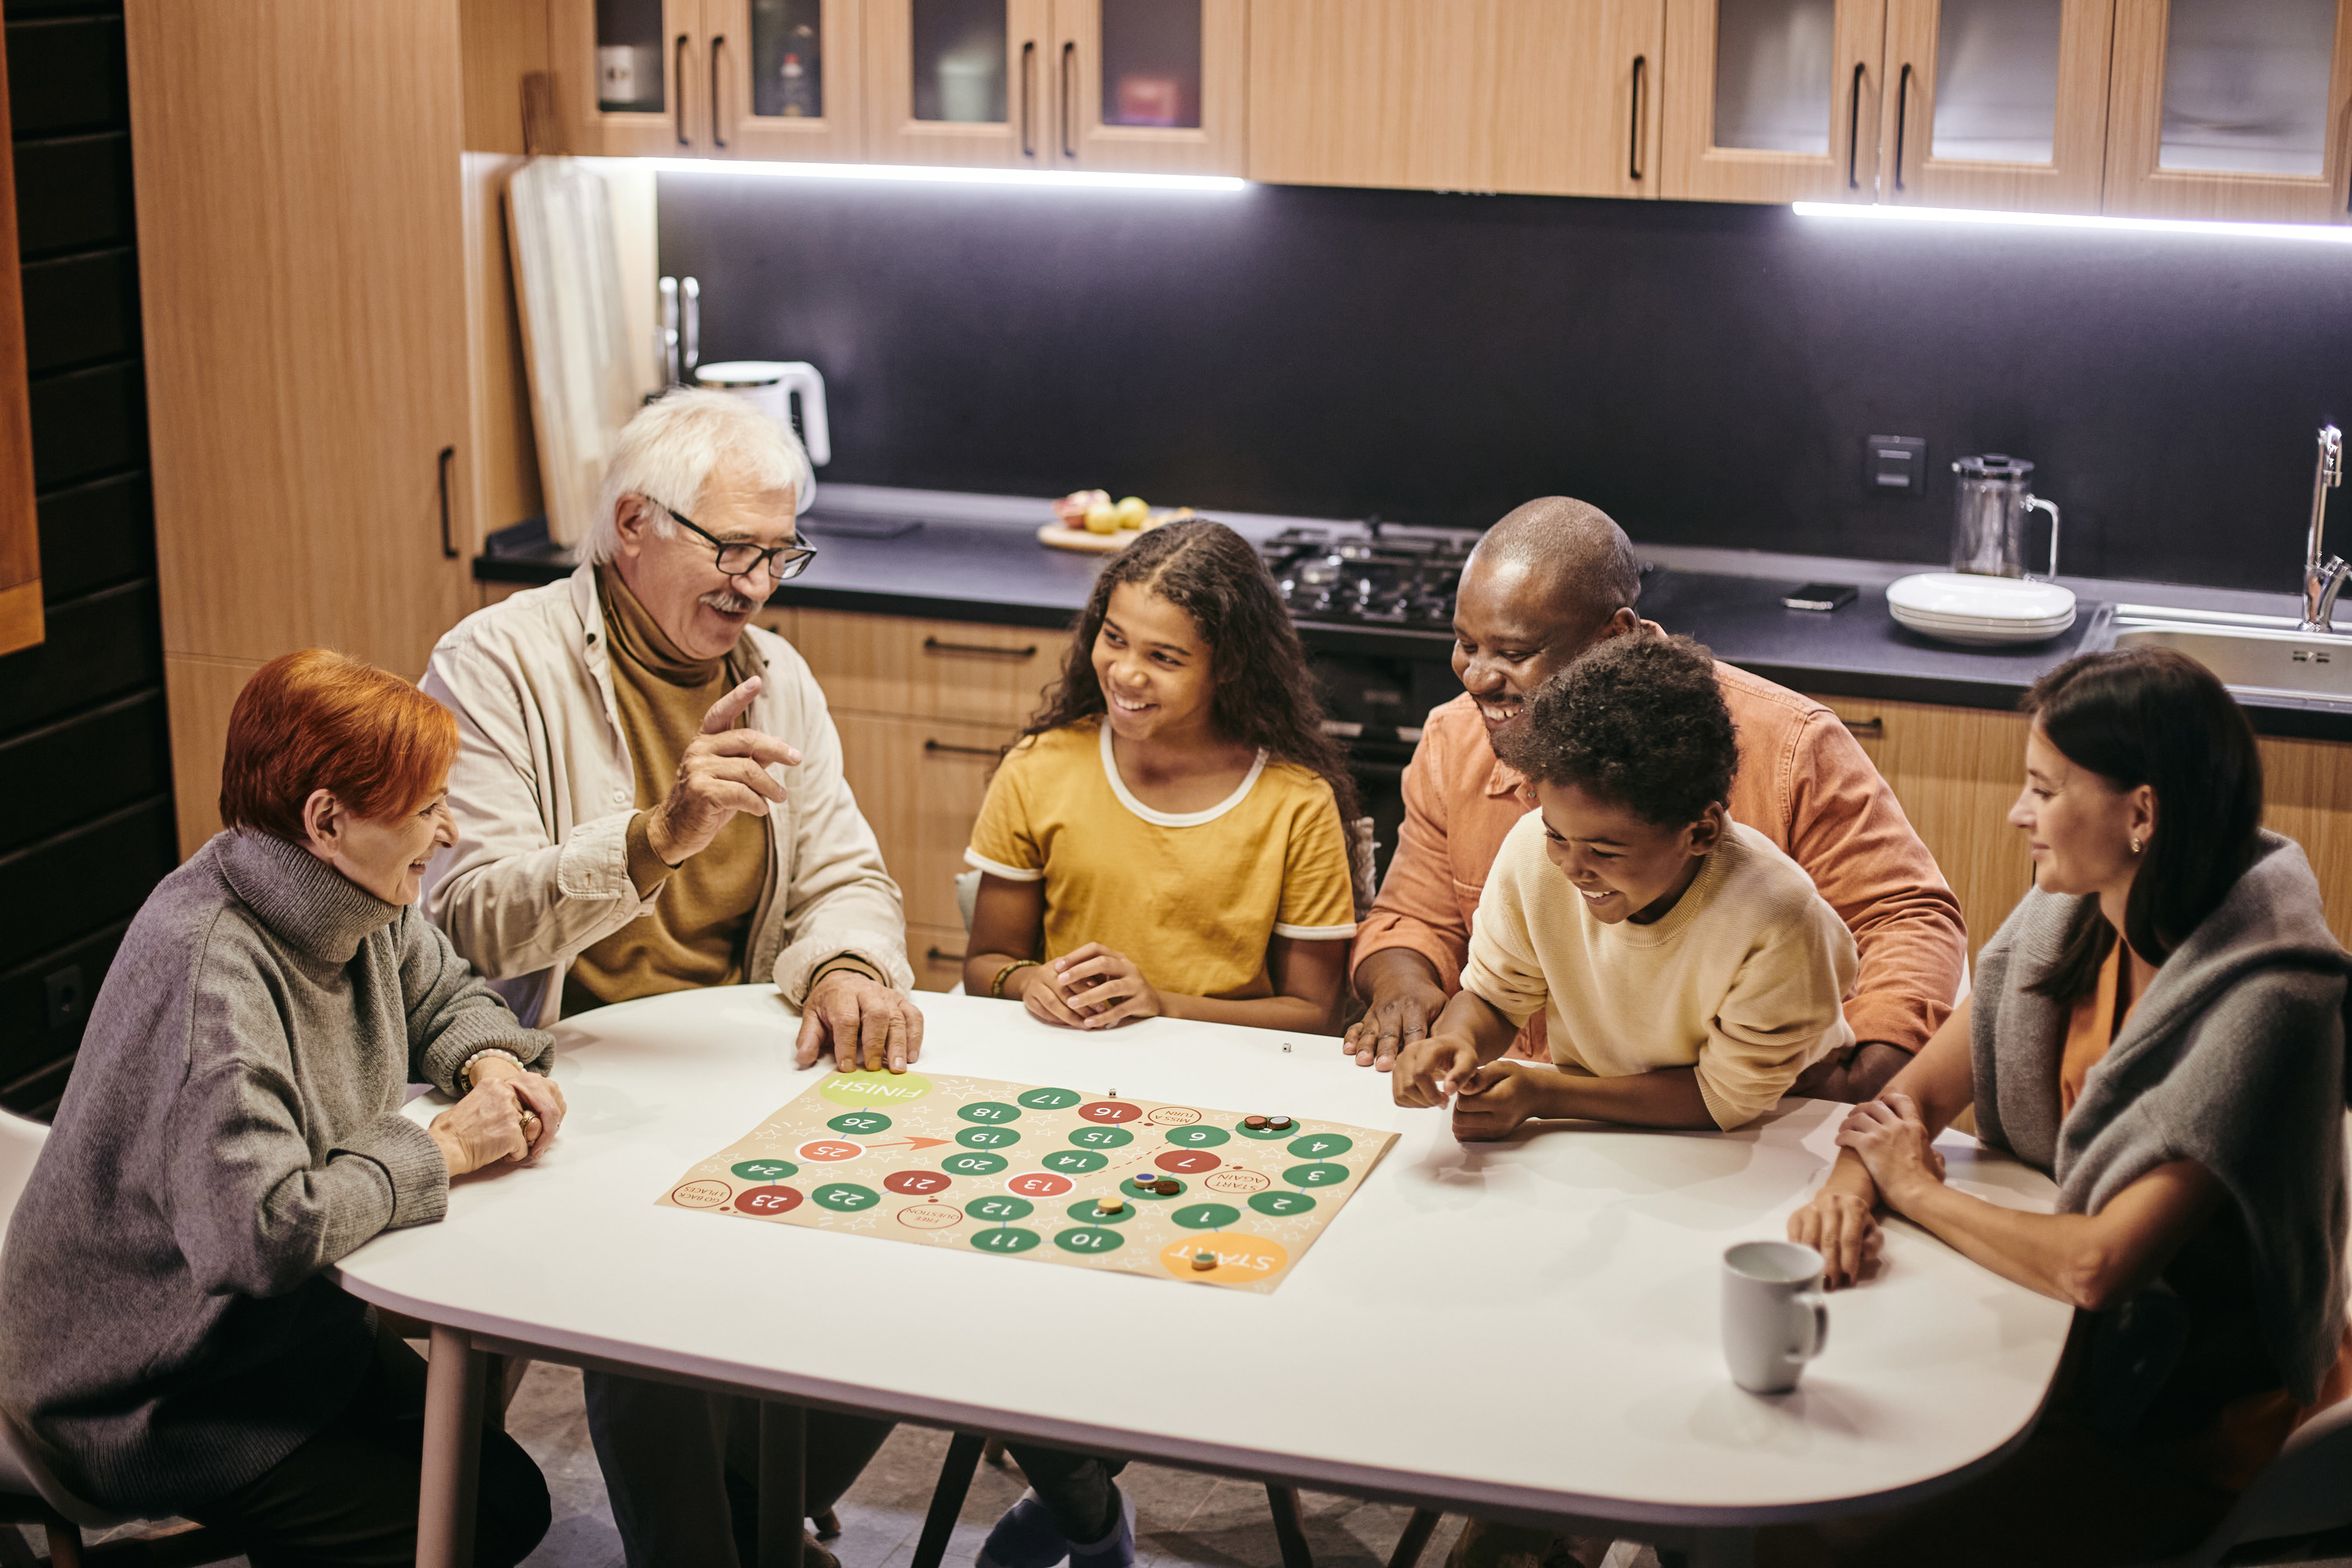 Family sitting around a table playing a board game together